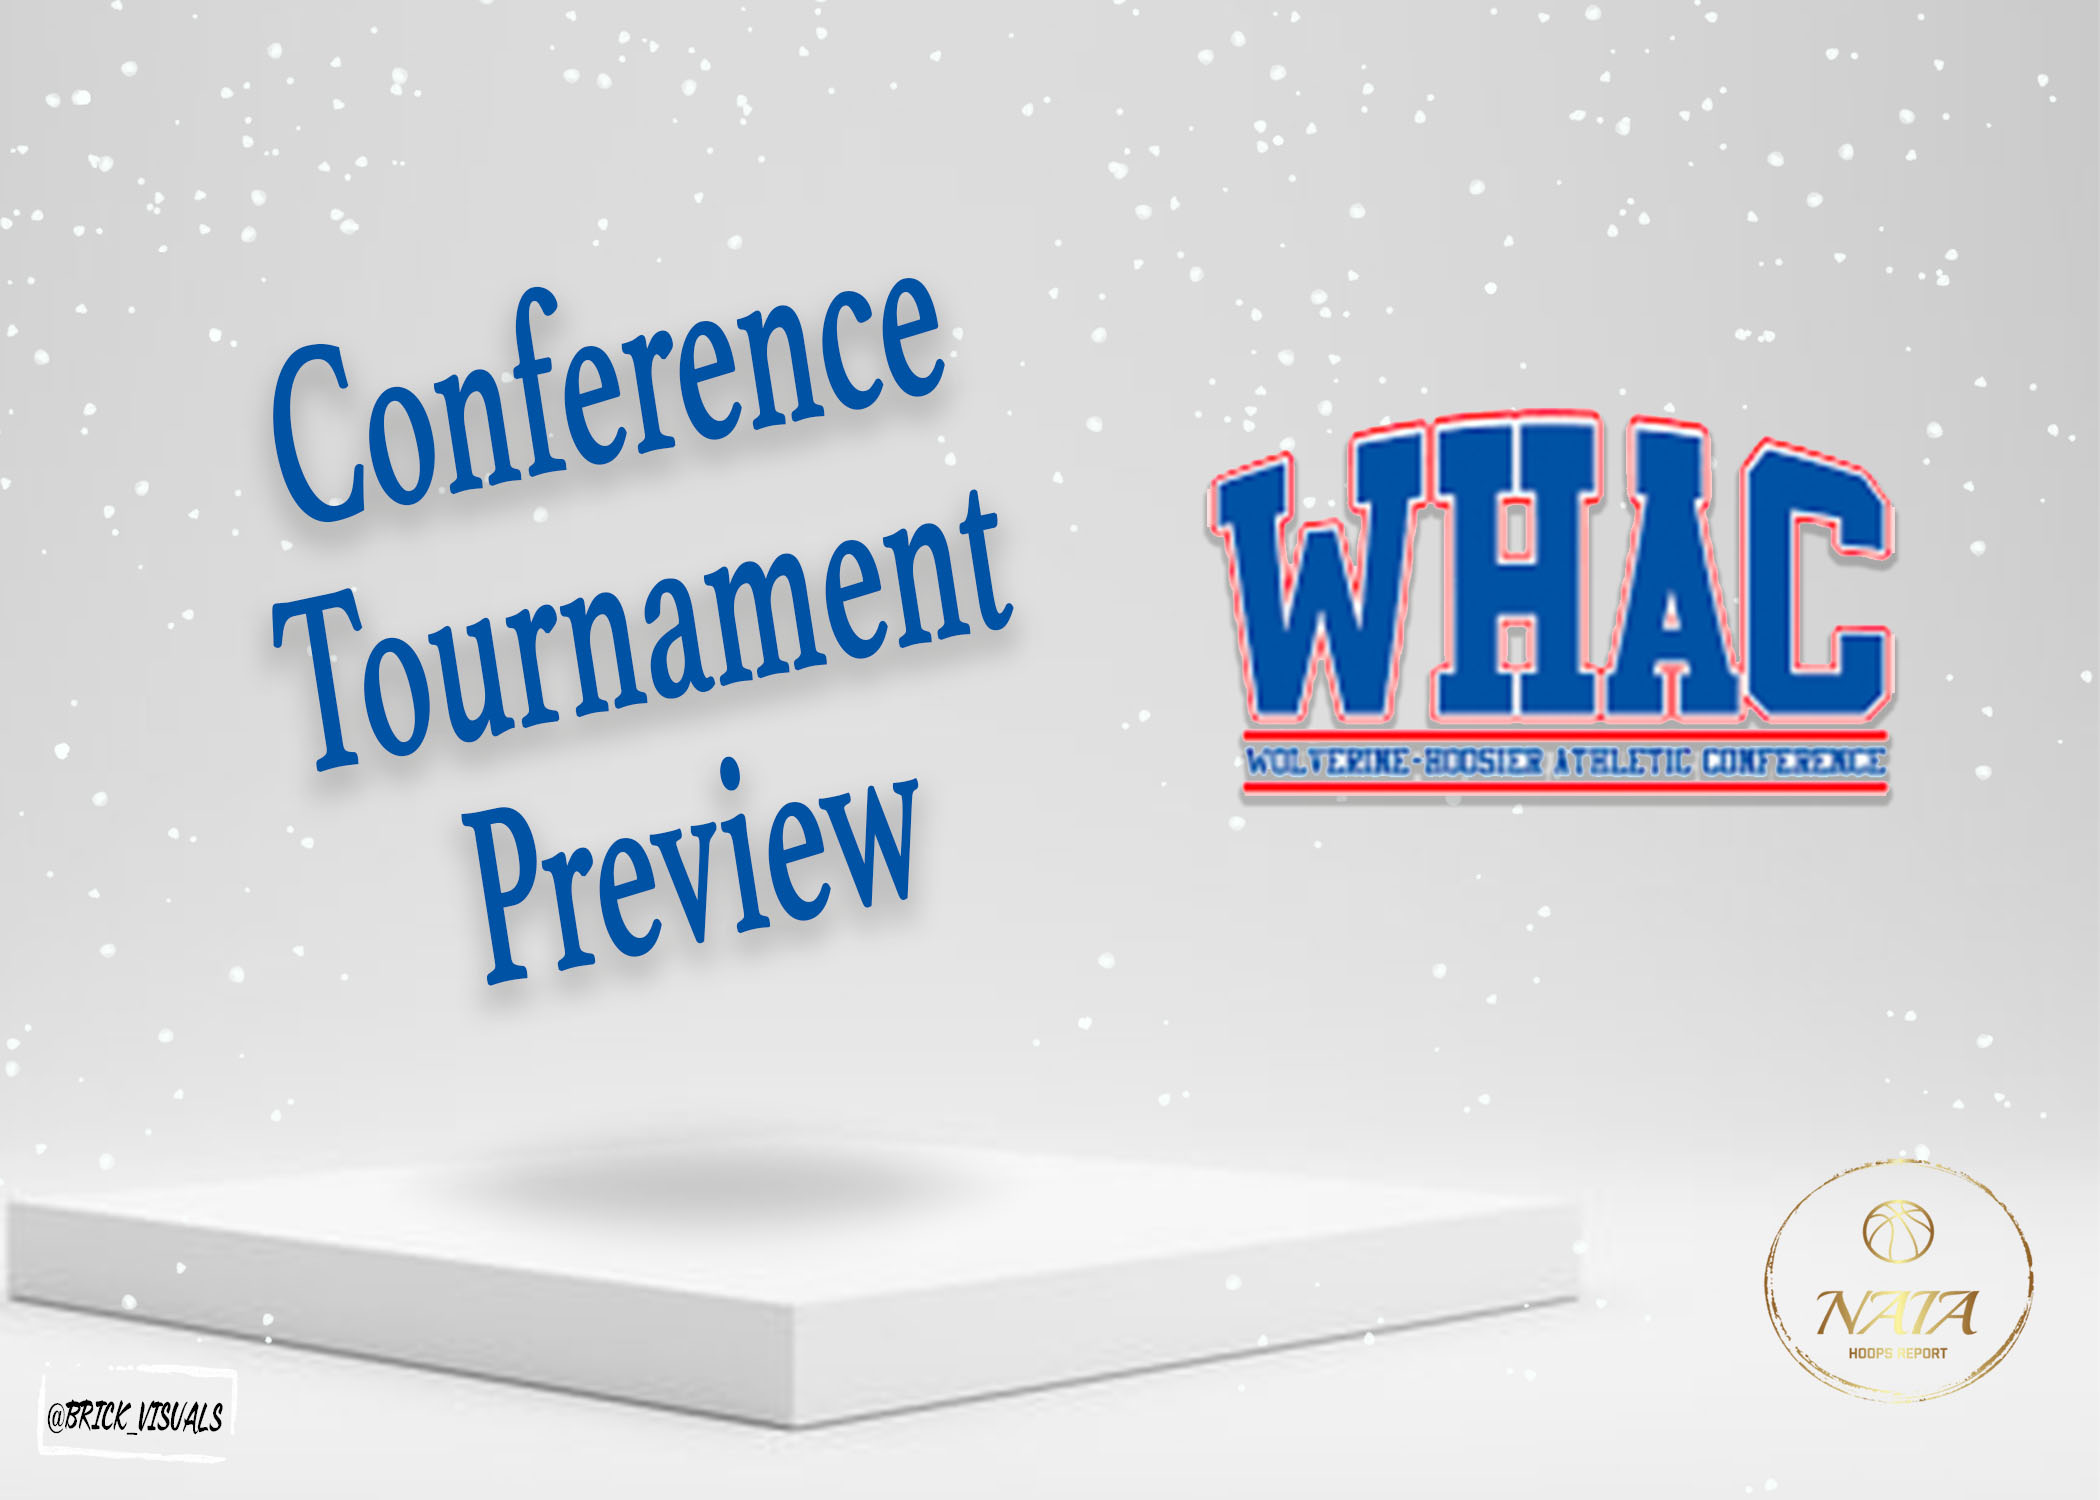 Wolverine-Hoosier Athletic Conference Tournament – Championship Preview